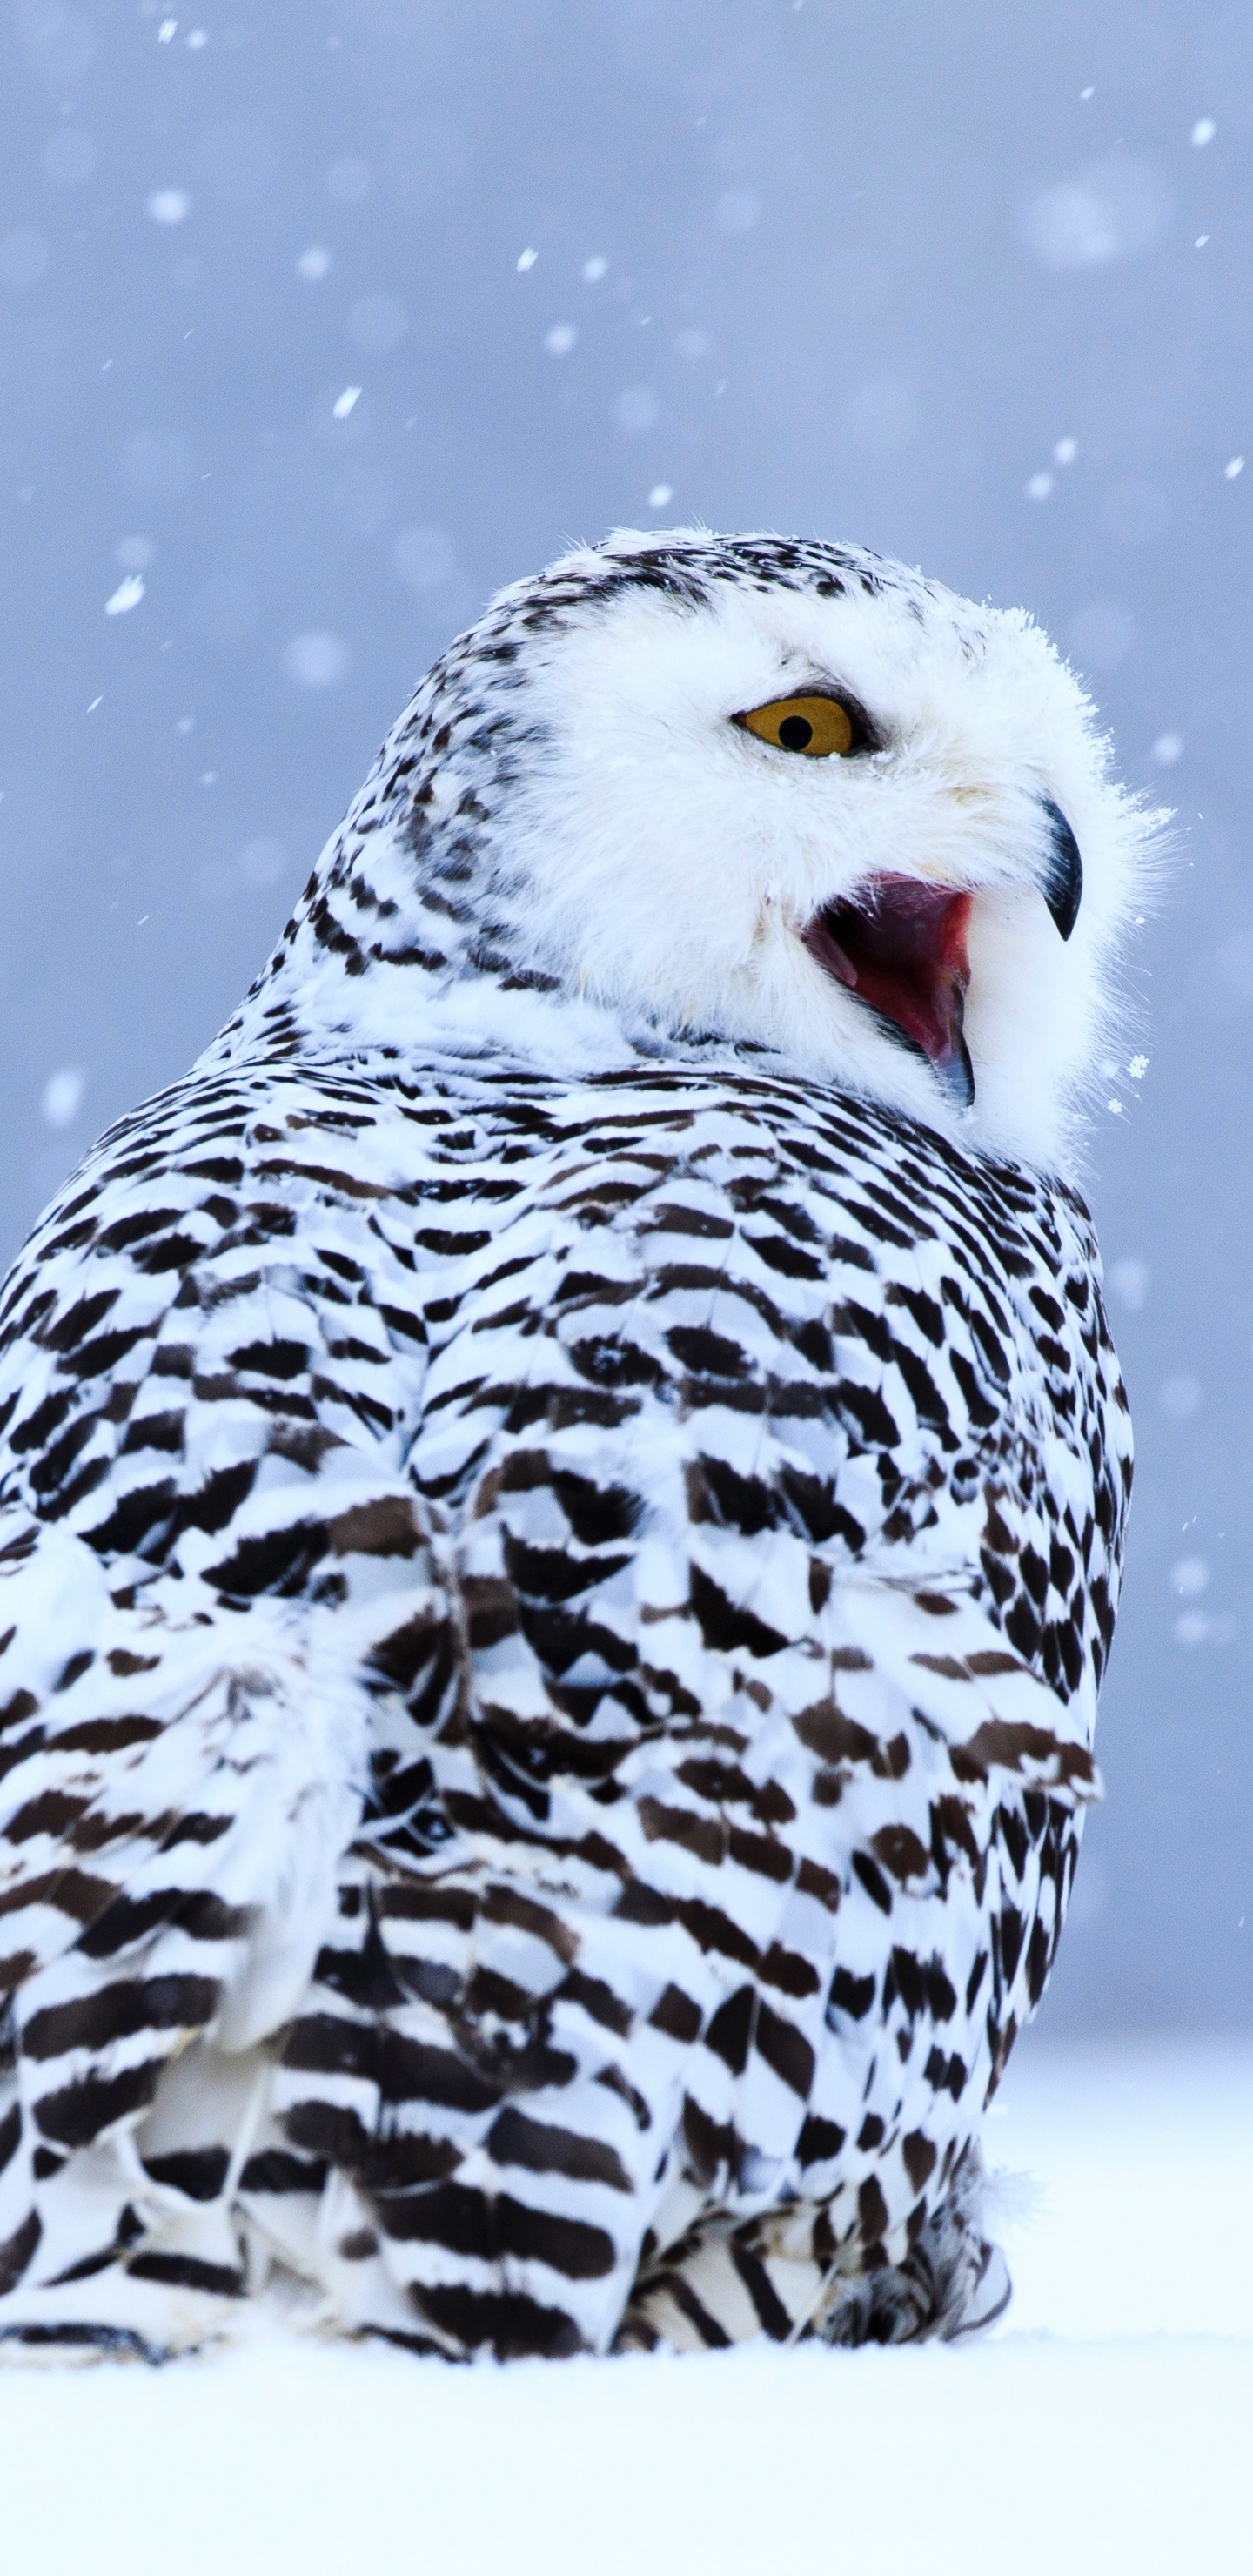 White and Black Owl on Snow Covered Ground During Daytime. Wallpaper in 1440x2960 Resolution